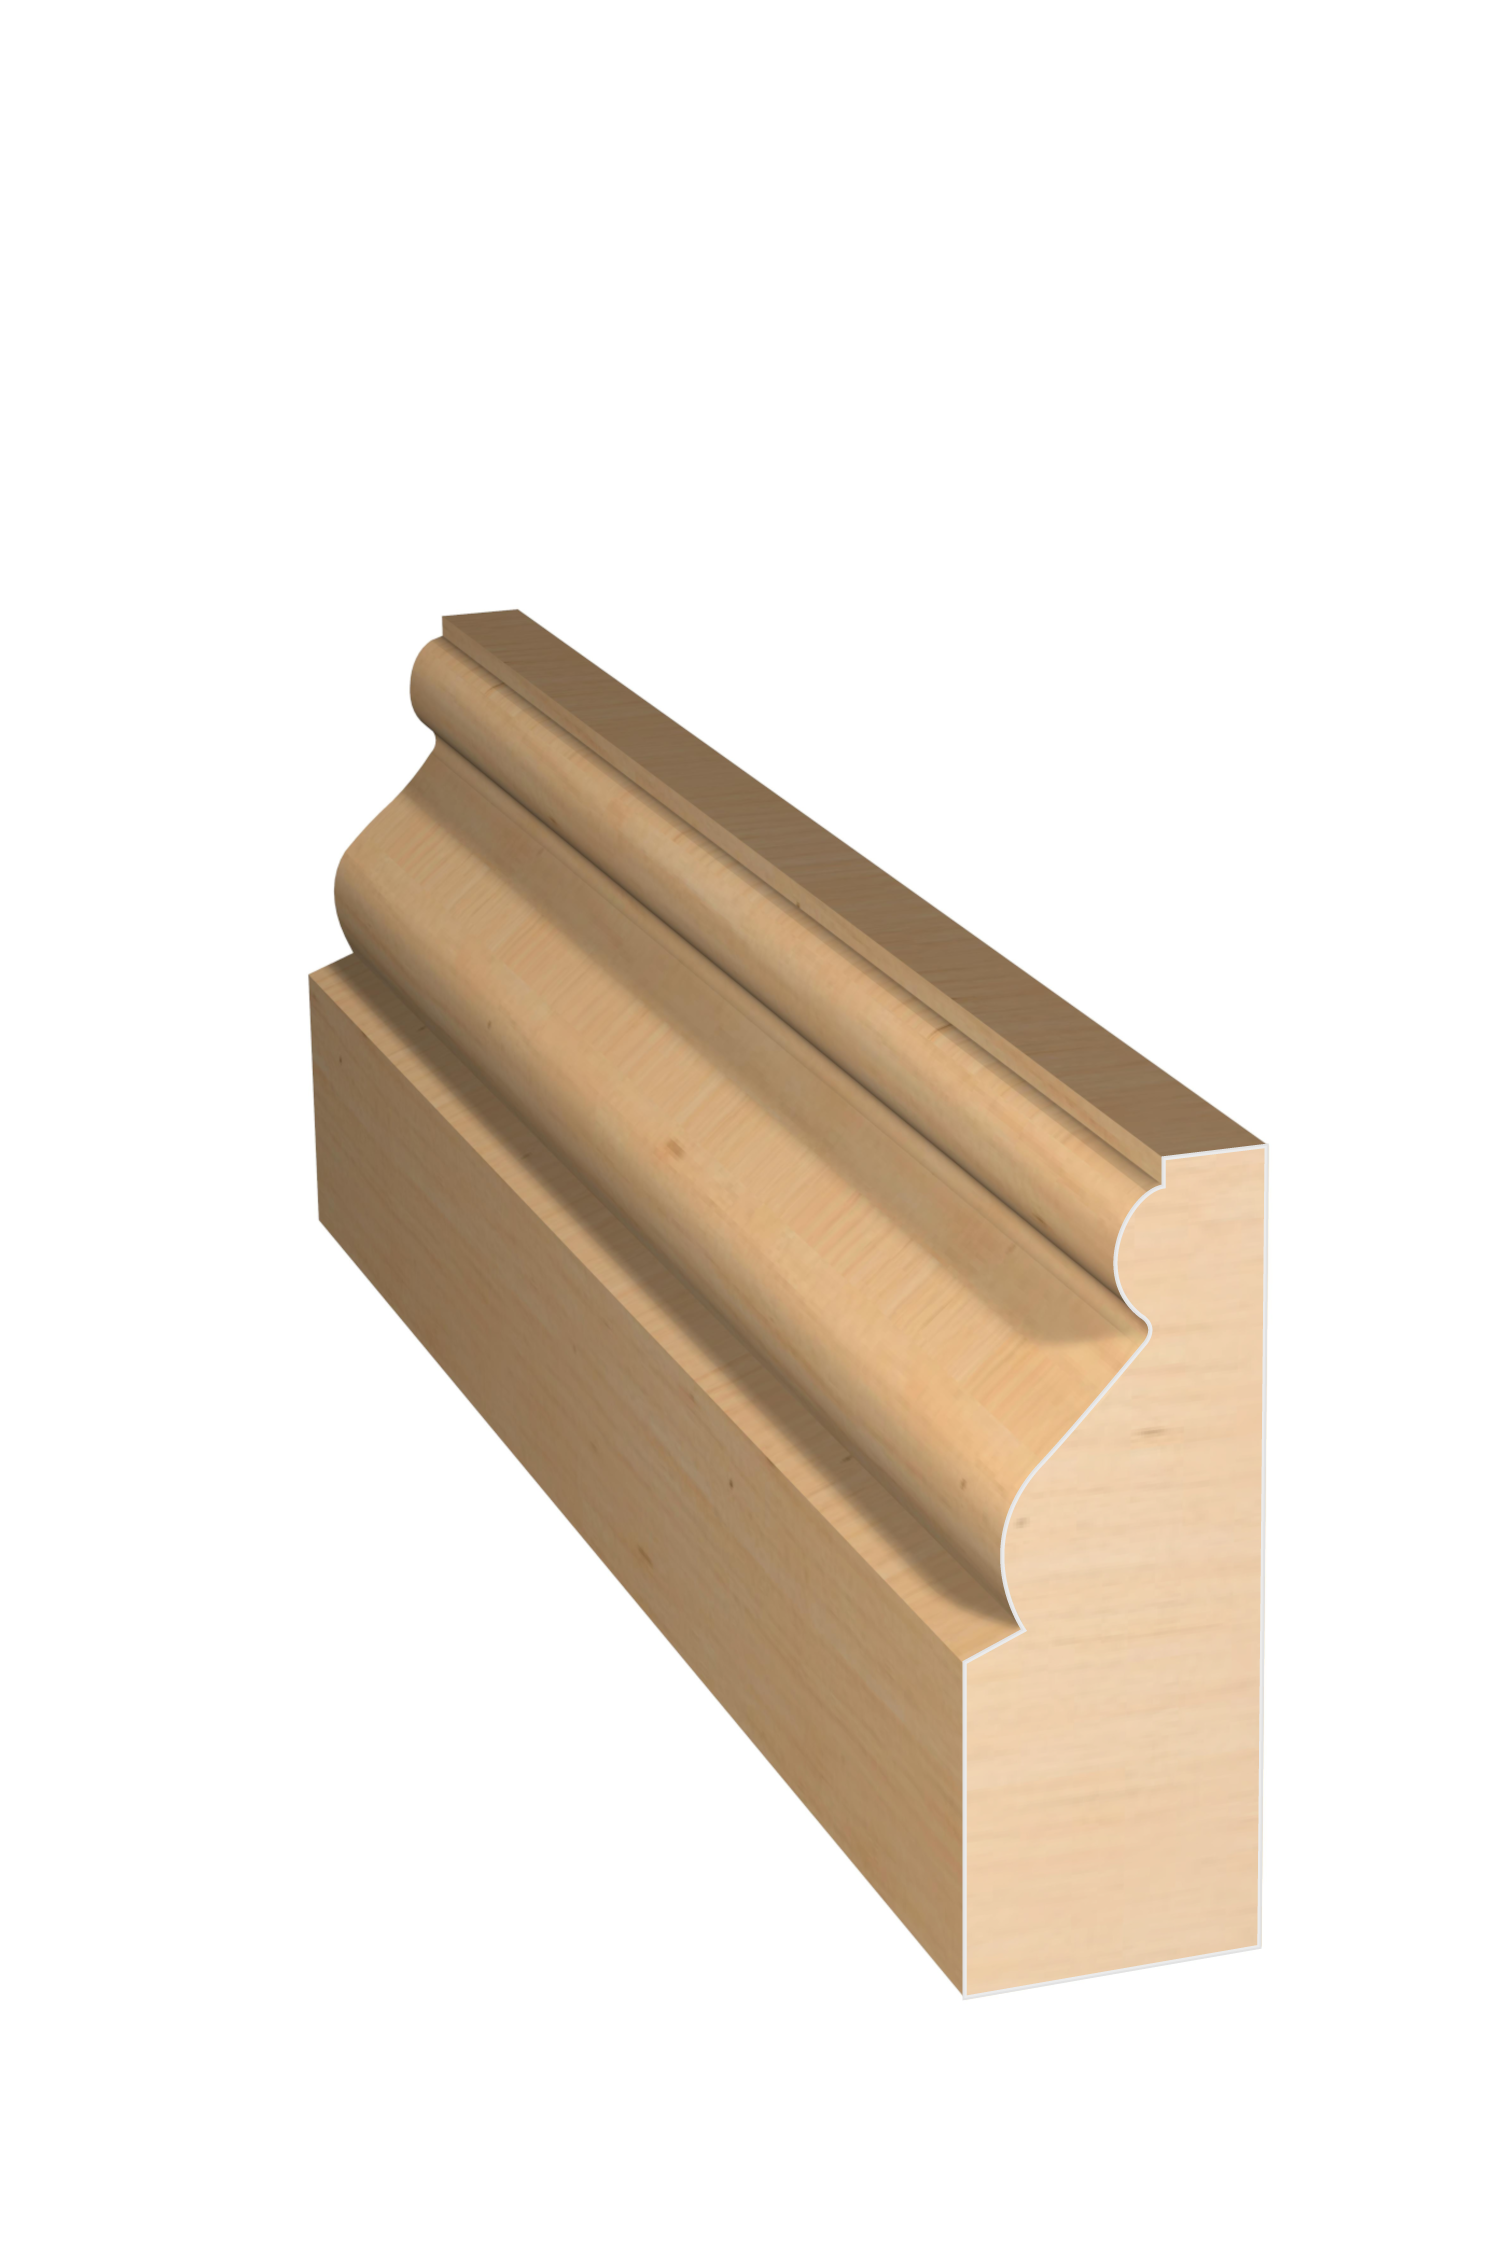 Three dimensional rendering of custom casing wood molding CAPL26 made by Public Lumber Company in Detroit.